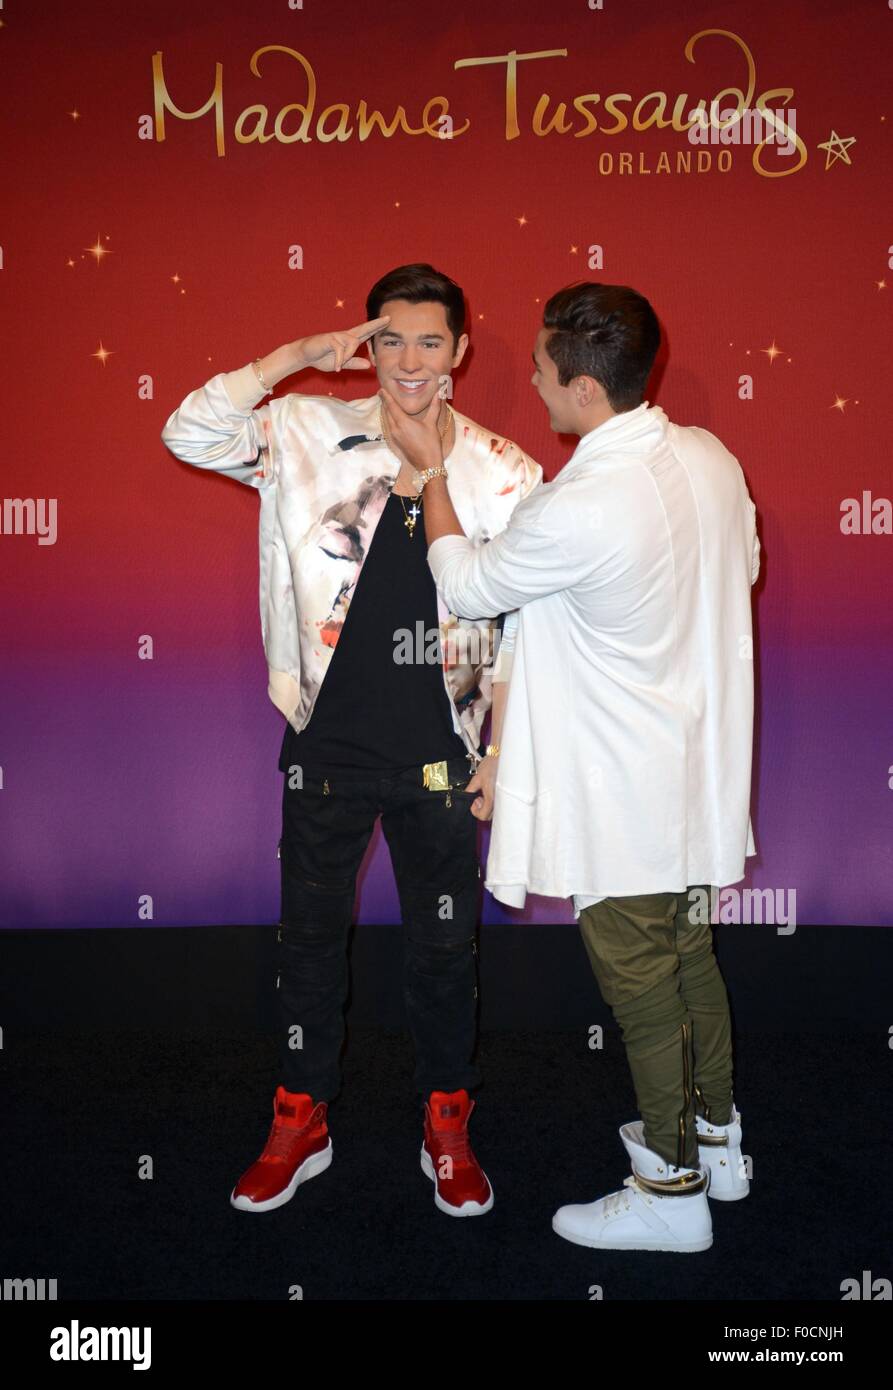 New York, NY, USA. 11th Aug, 2015. Austin Mahone at a public appearance for Austin Mahone Wax Figure Unveiling at Madame Tussauds, Madame Tussauds New York, New York, NY August 11, 2015. © Derek Storm/Everett Collection/Alamy Live News Stock Photo